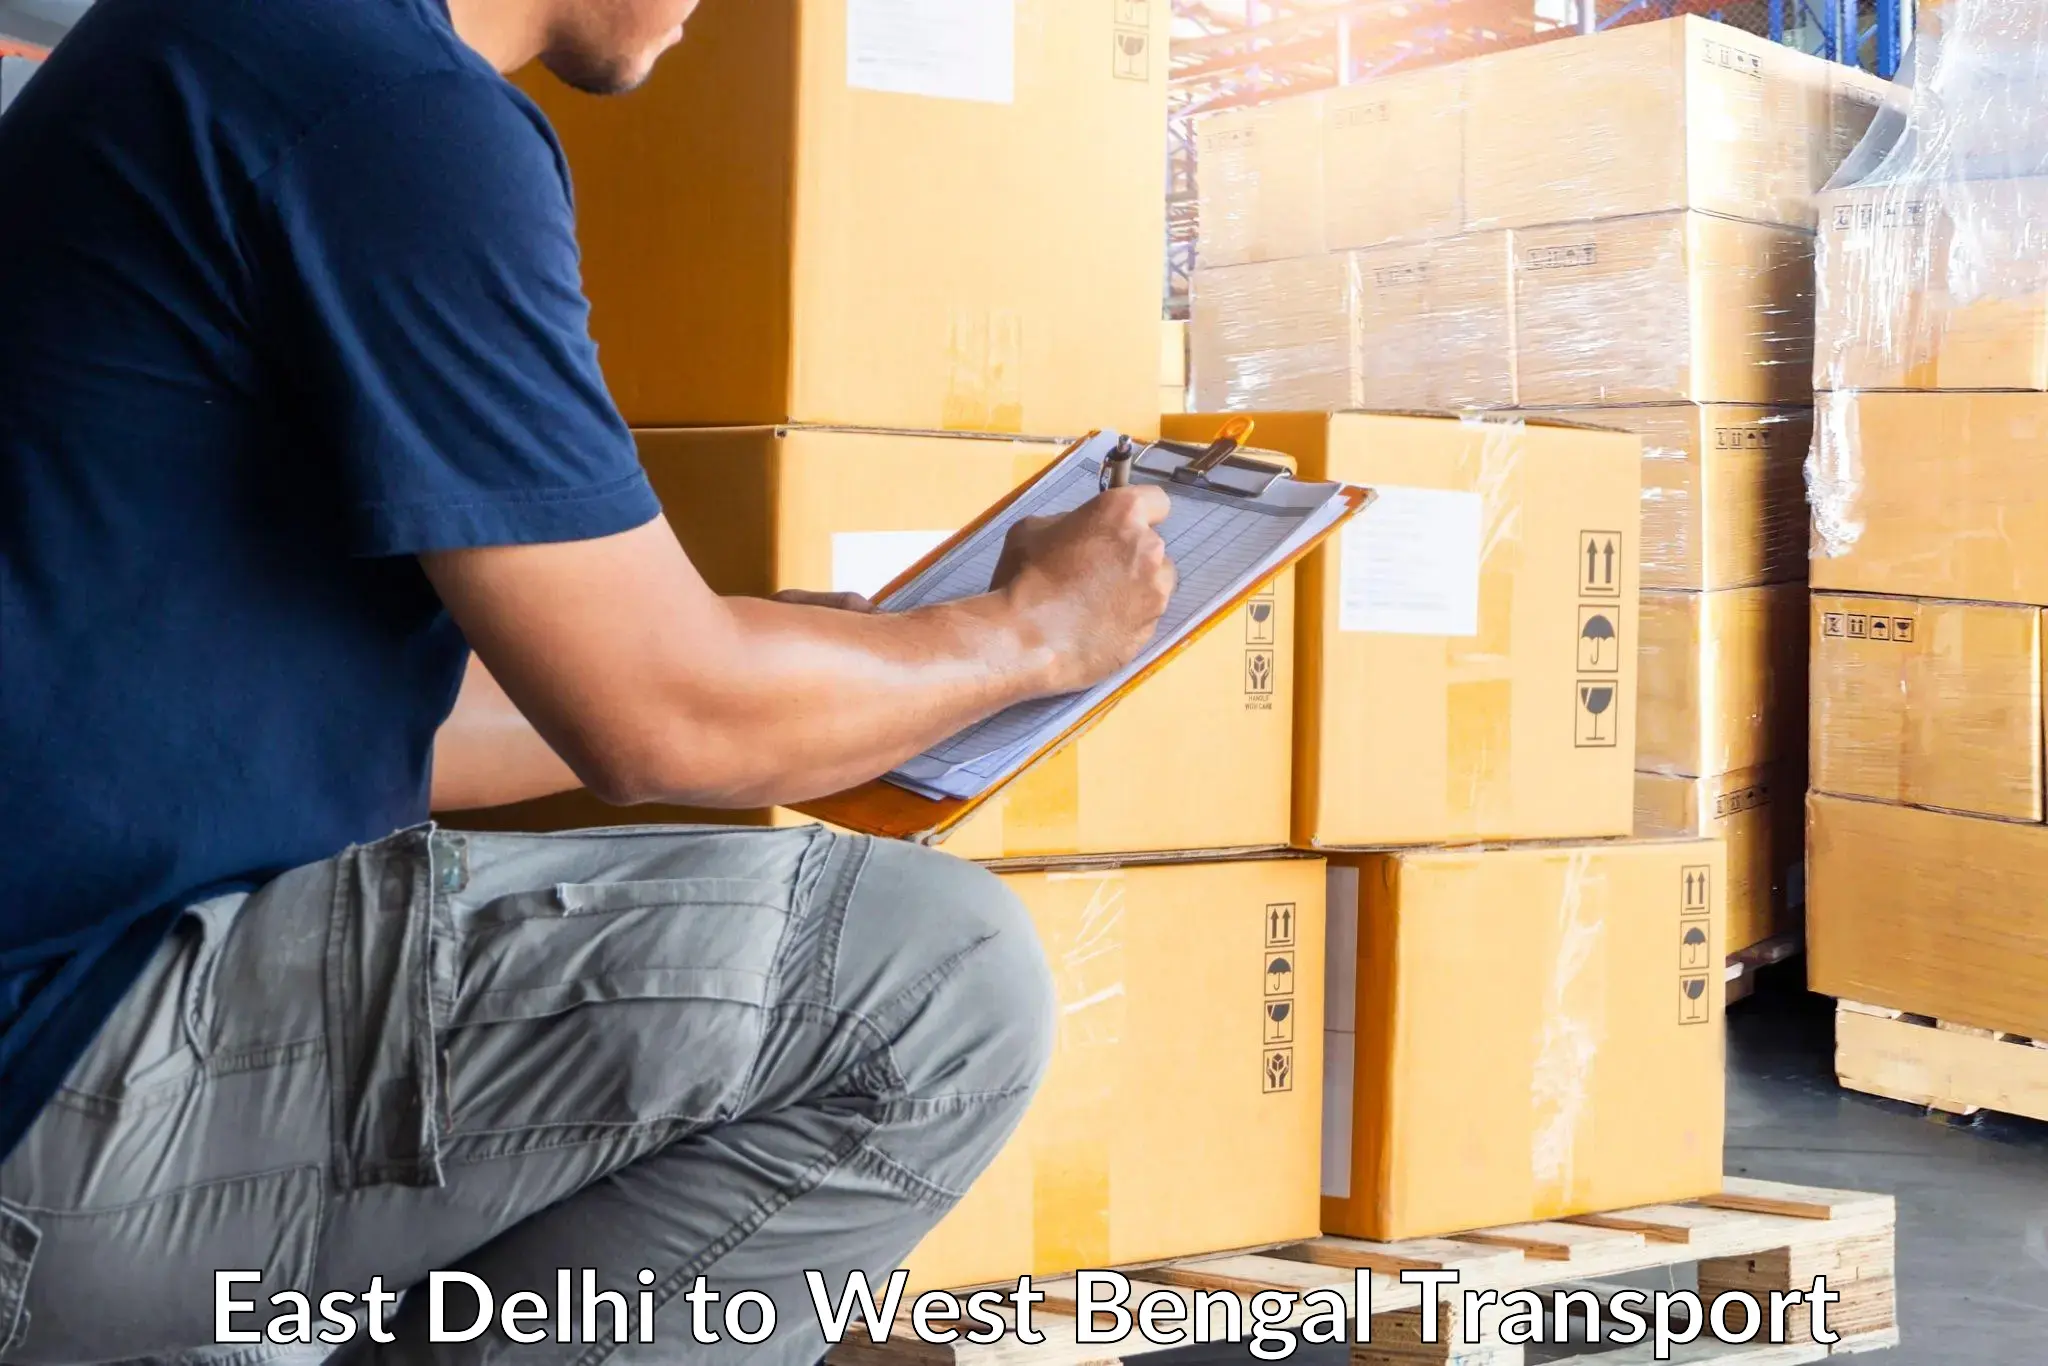 Furniture transport service in East Delhi to West Bengal